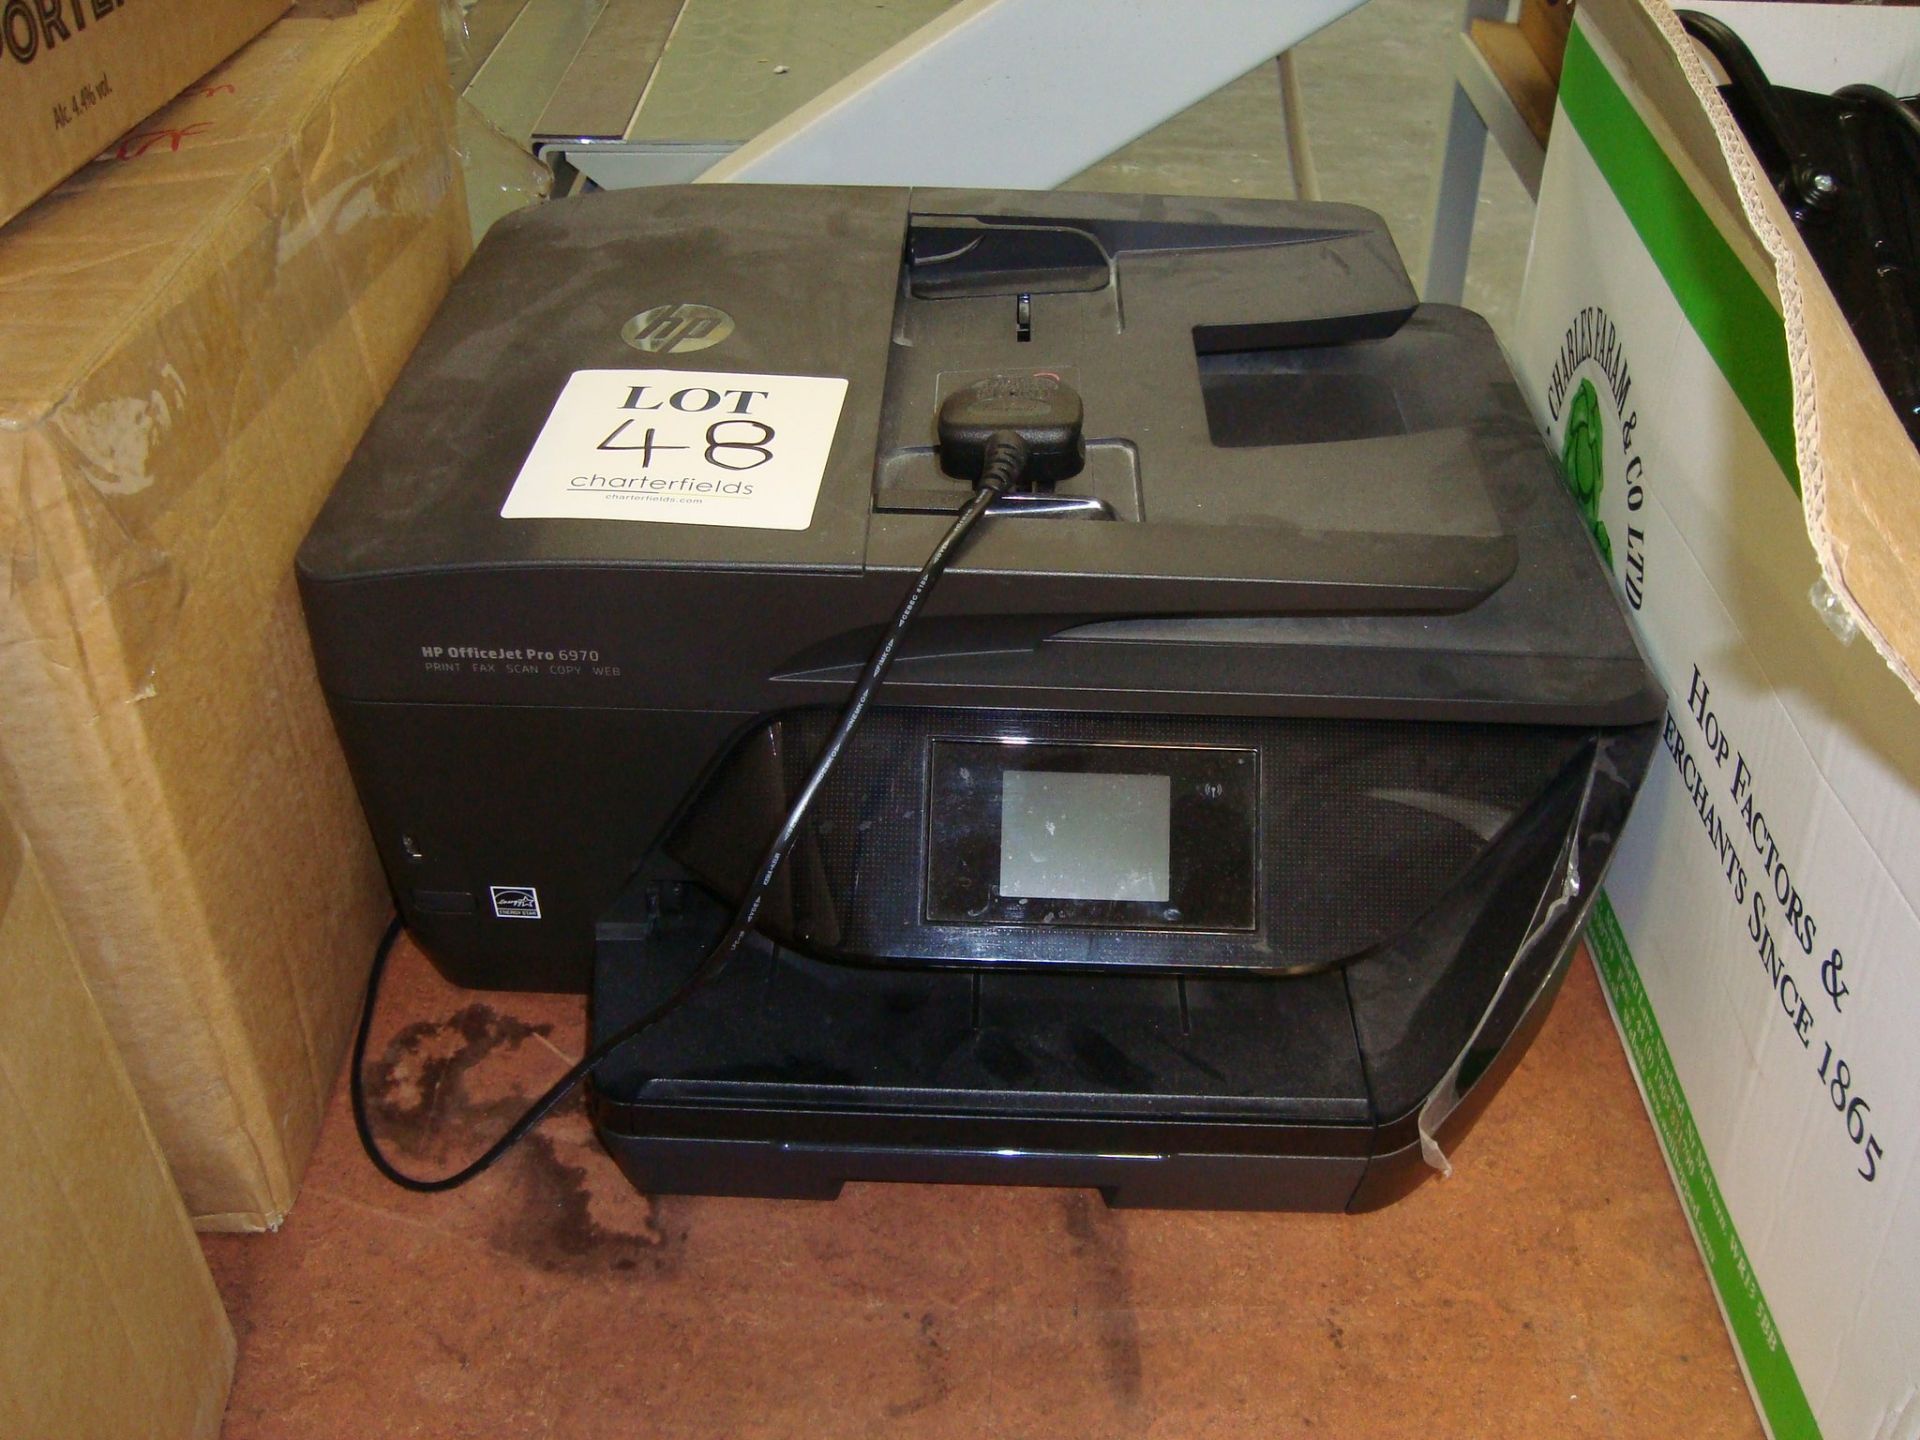 The office electronic equipment including Xerox Versalink C405 multi-function printer, Brewman